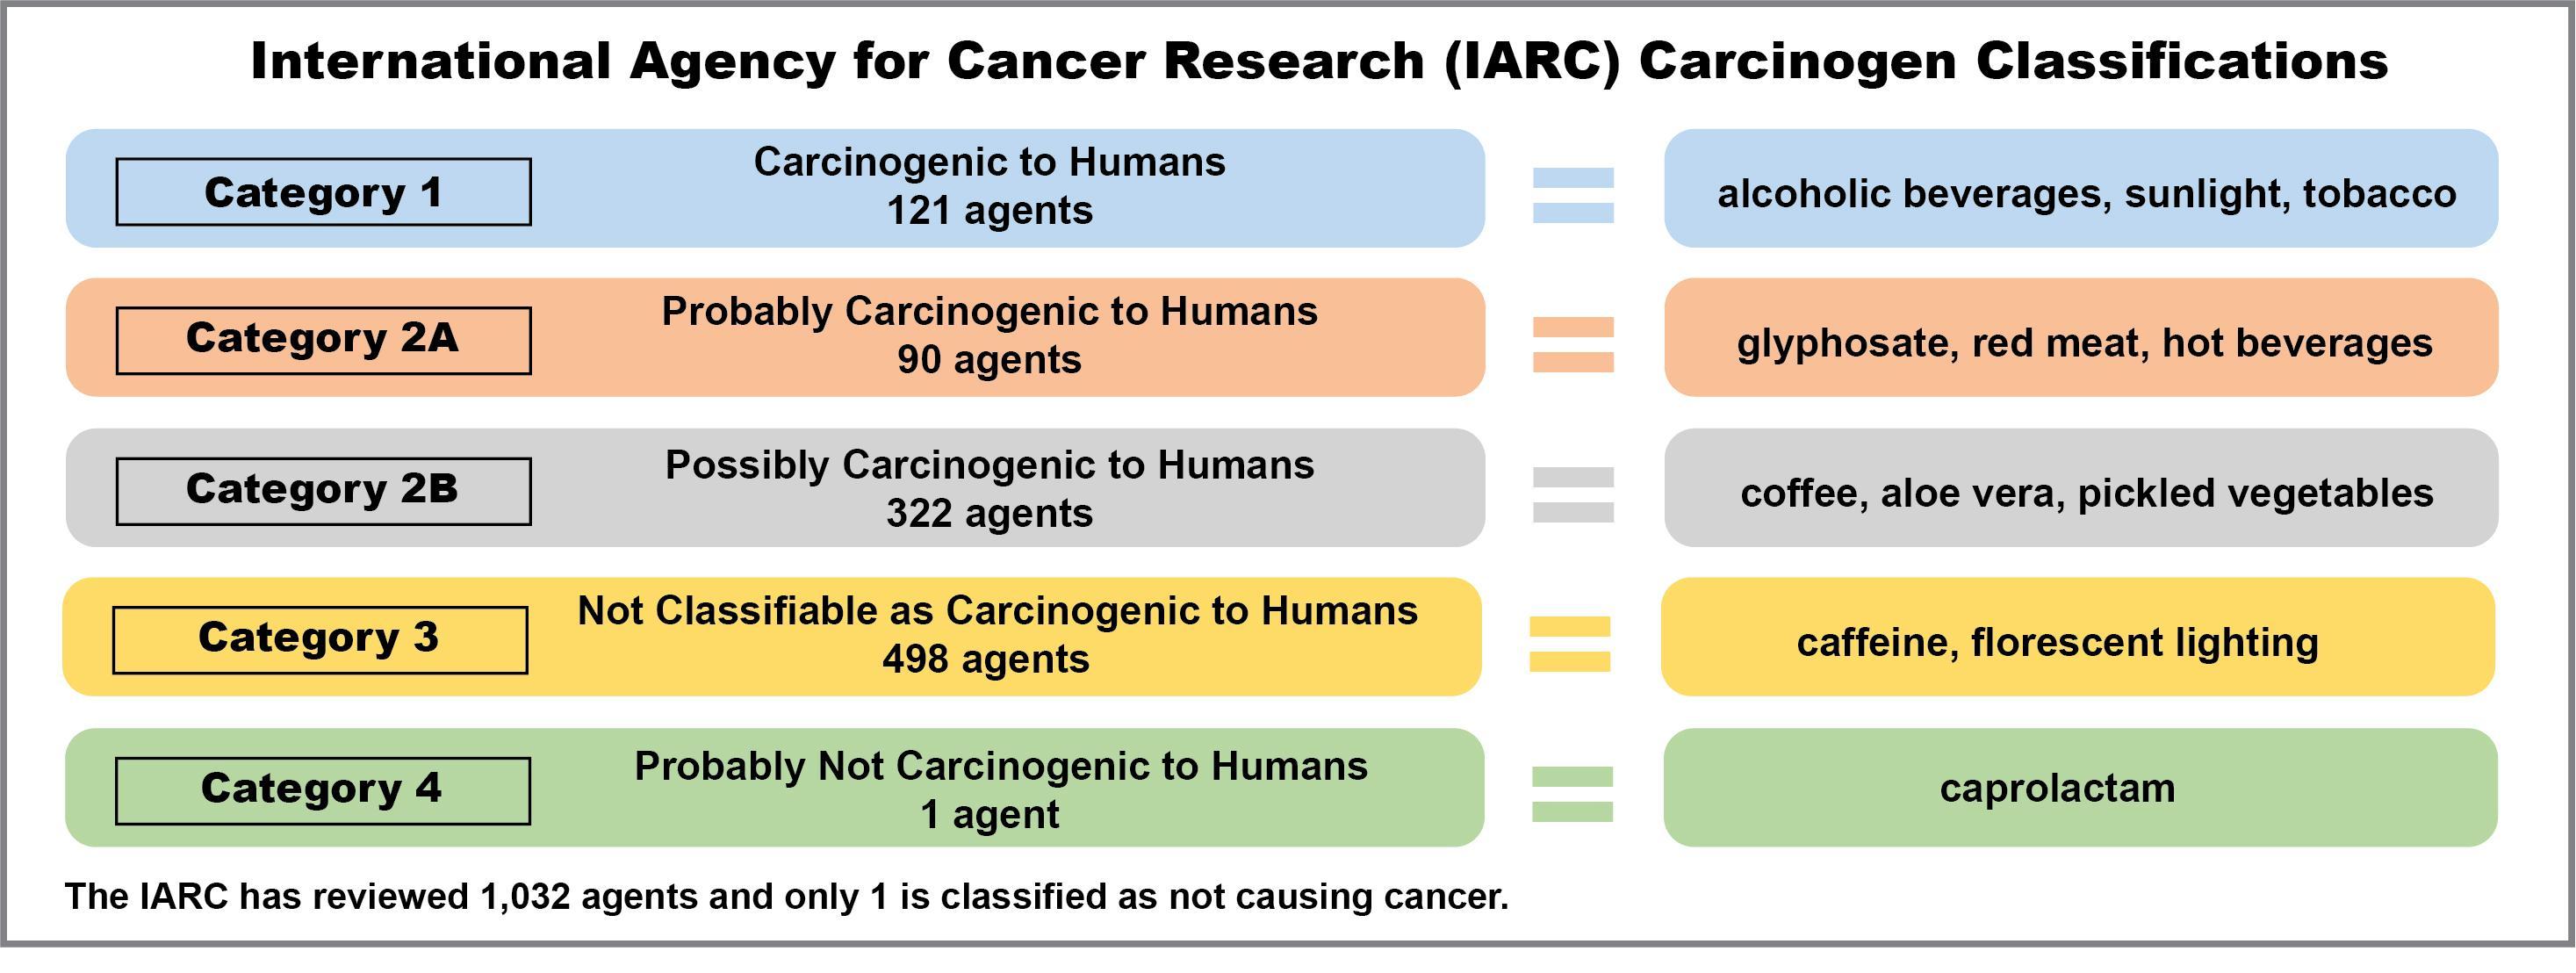 Categories and examples of substances classified as carcinogenic by the International Agency for Cancer Research (IARC)